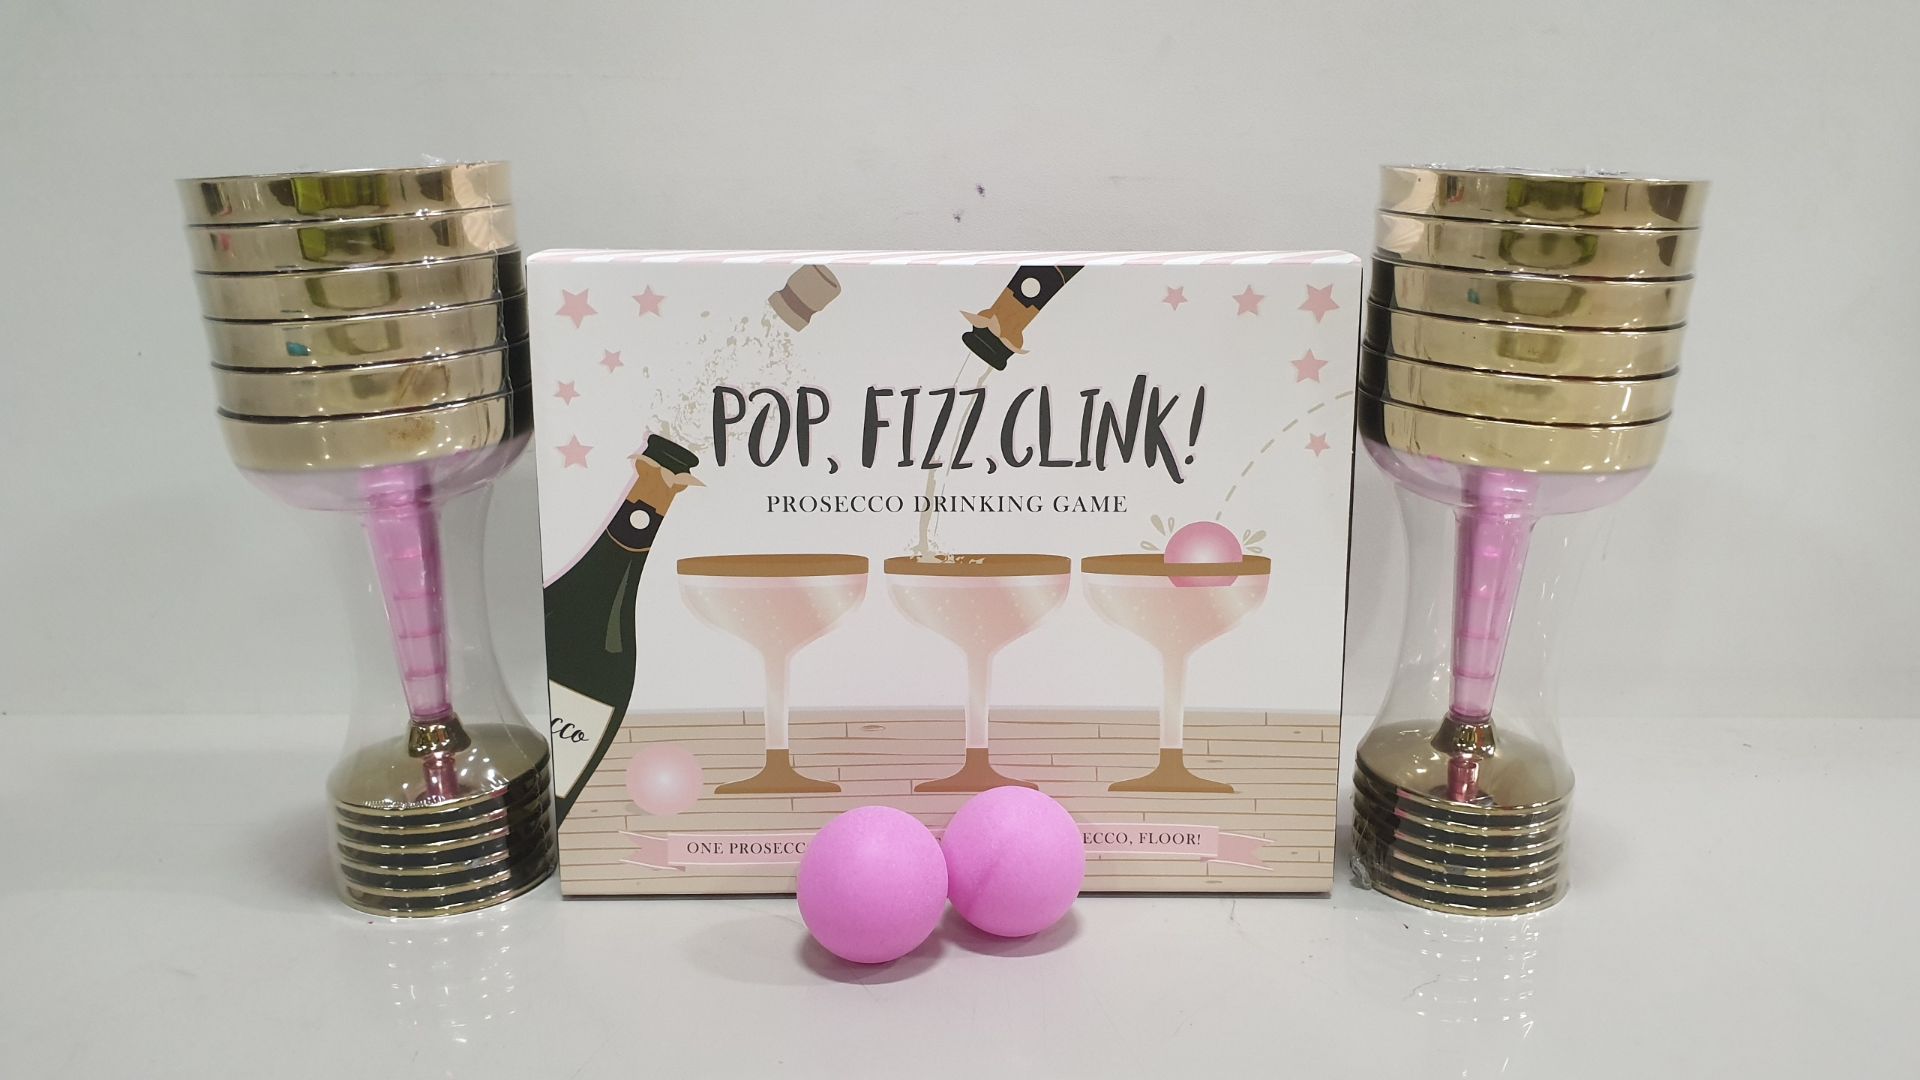 30 X BRAND NEW POP,FIZZ,CLINK PROSECCO DRINKING GAME (CONTAINS SET OF 12 PLASTIC PROSECCO GLASSES, 2